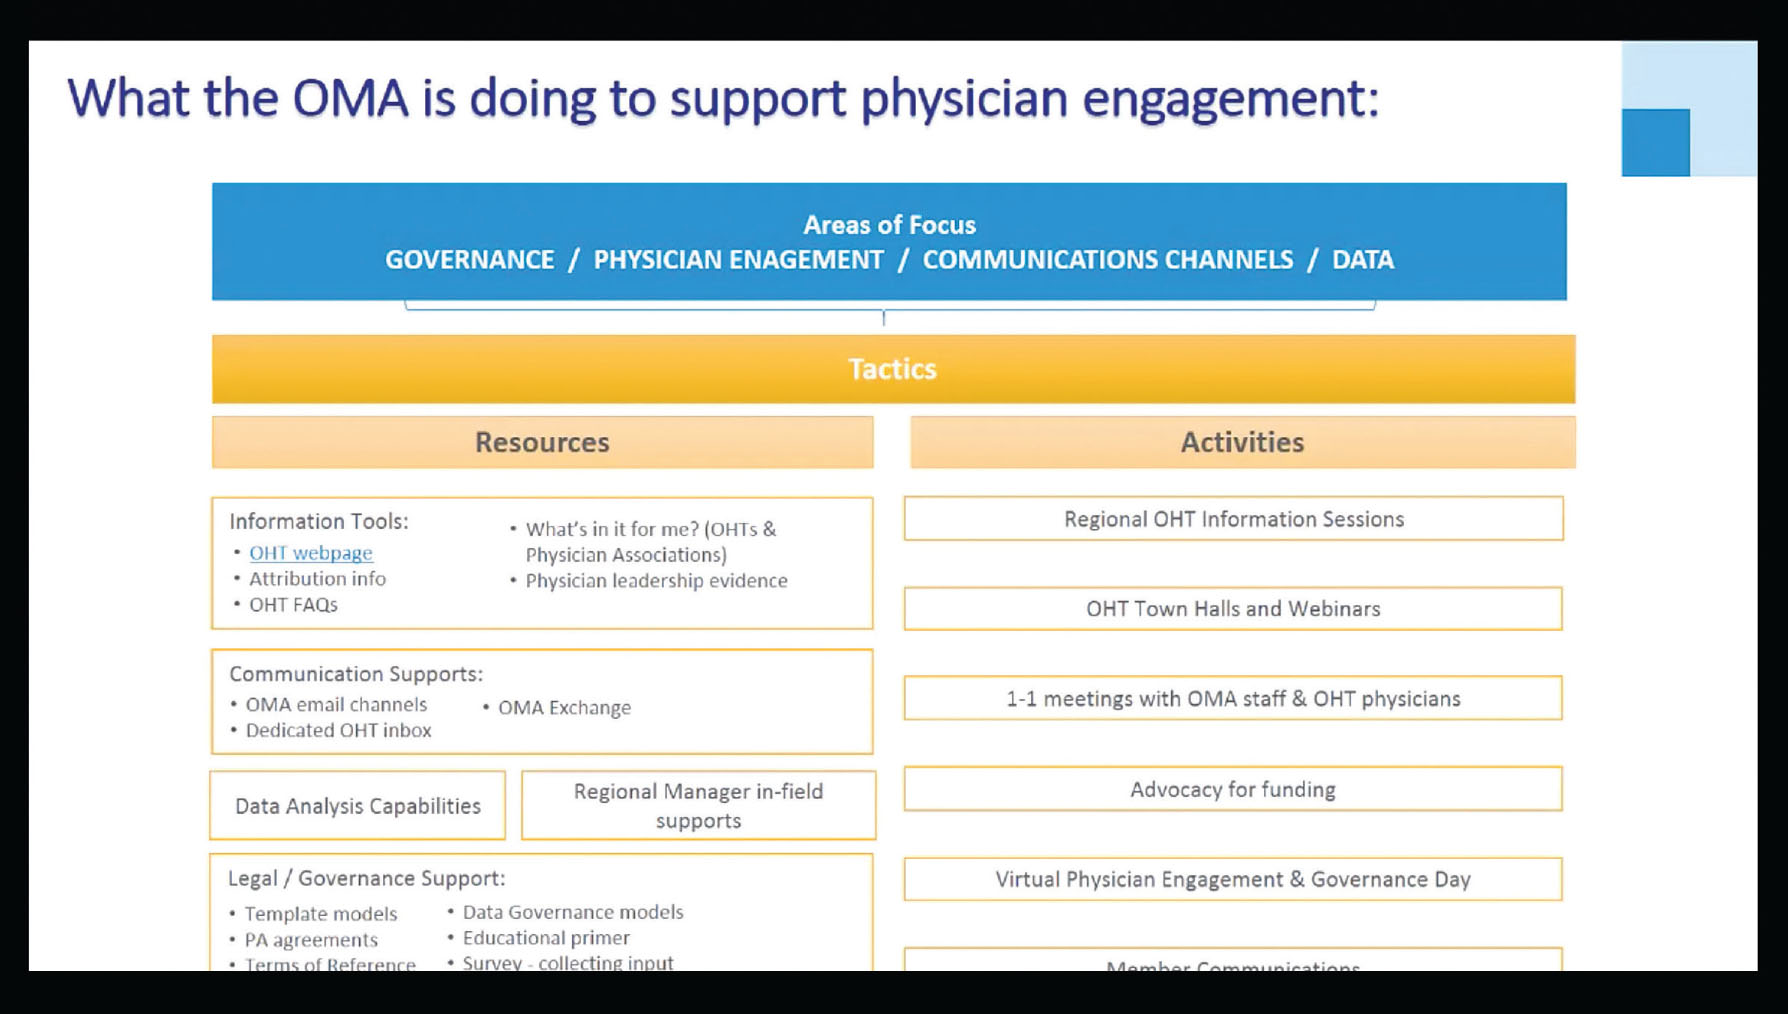 Slide from the OHT Governance Day presentation on how the OMA supports physician engagement.